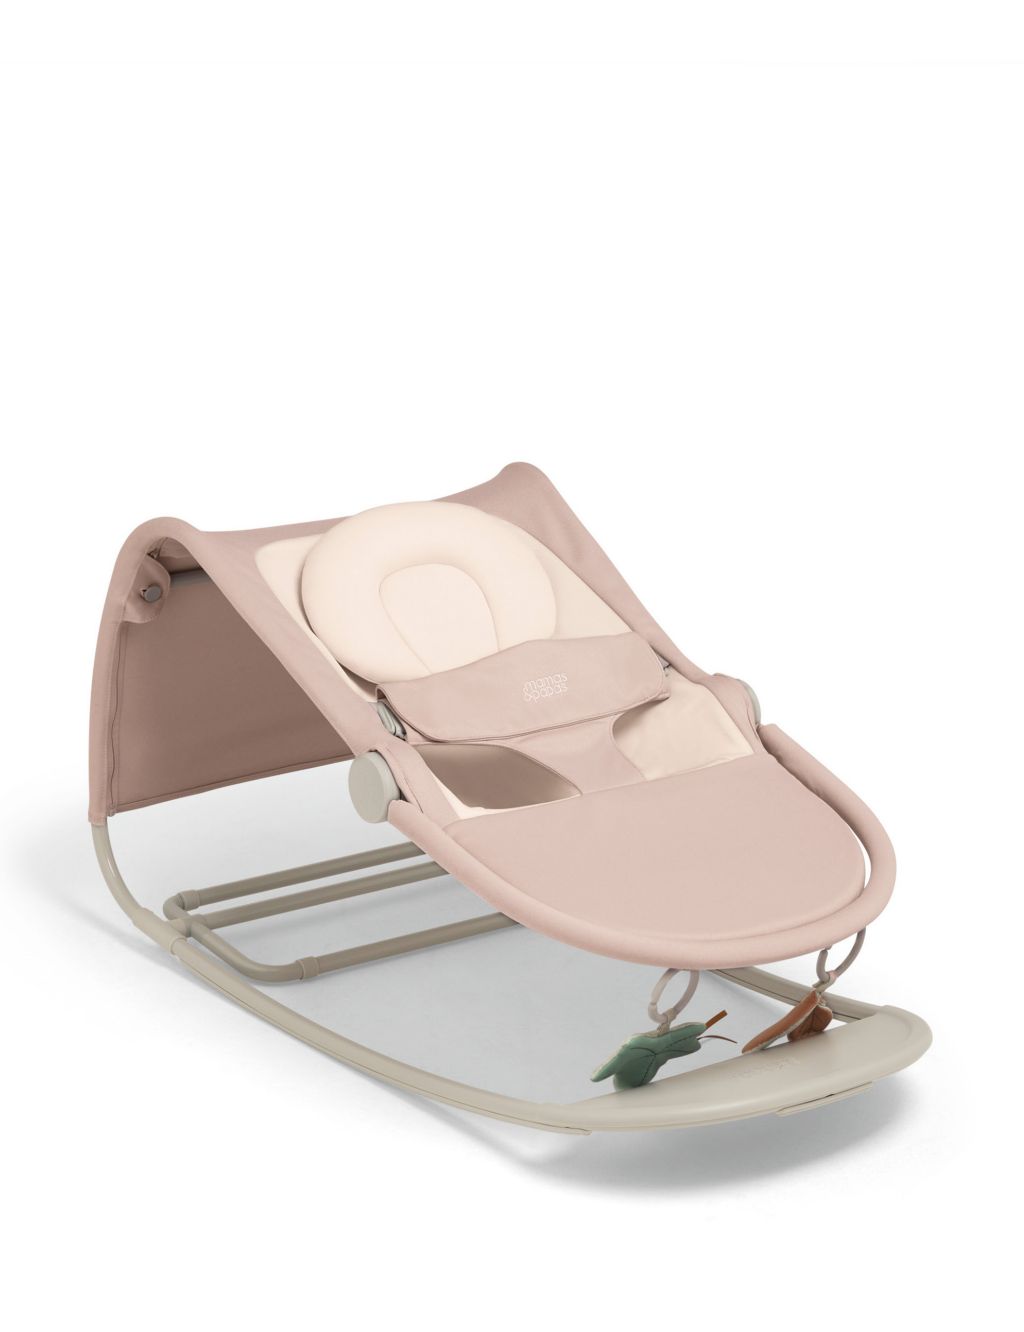 Tempo 3-in-1 Rocker Ivy Bouncer image 2